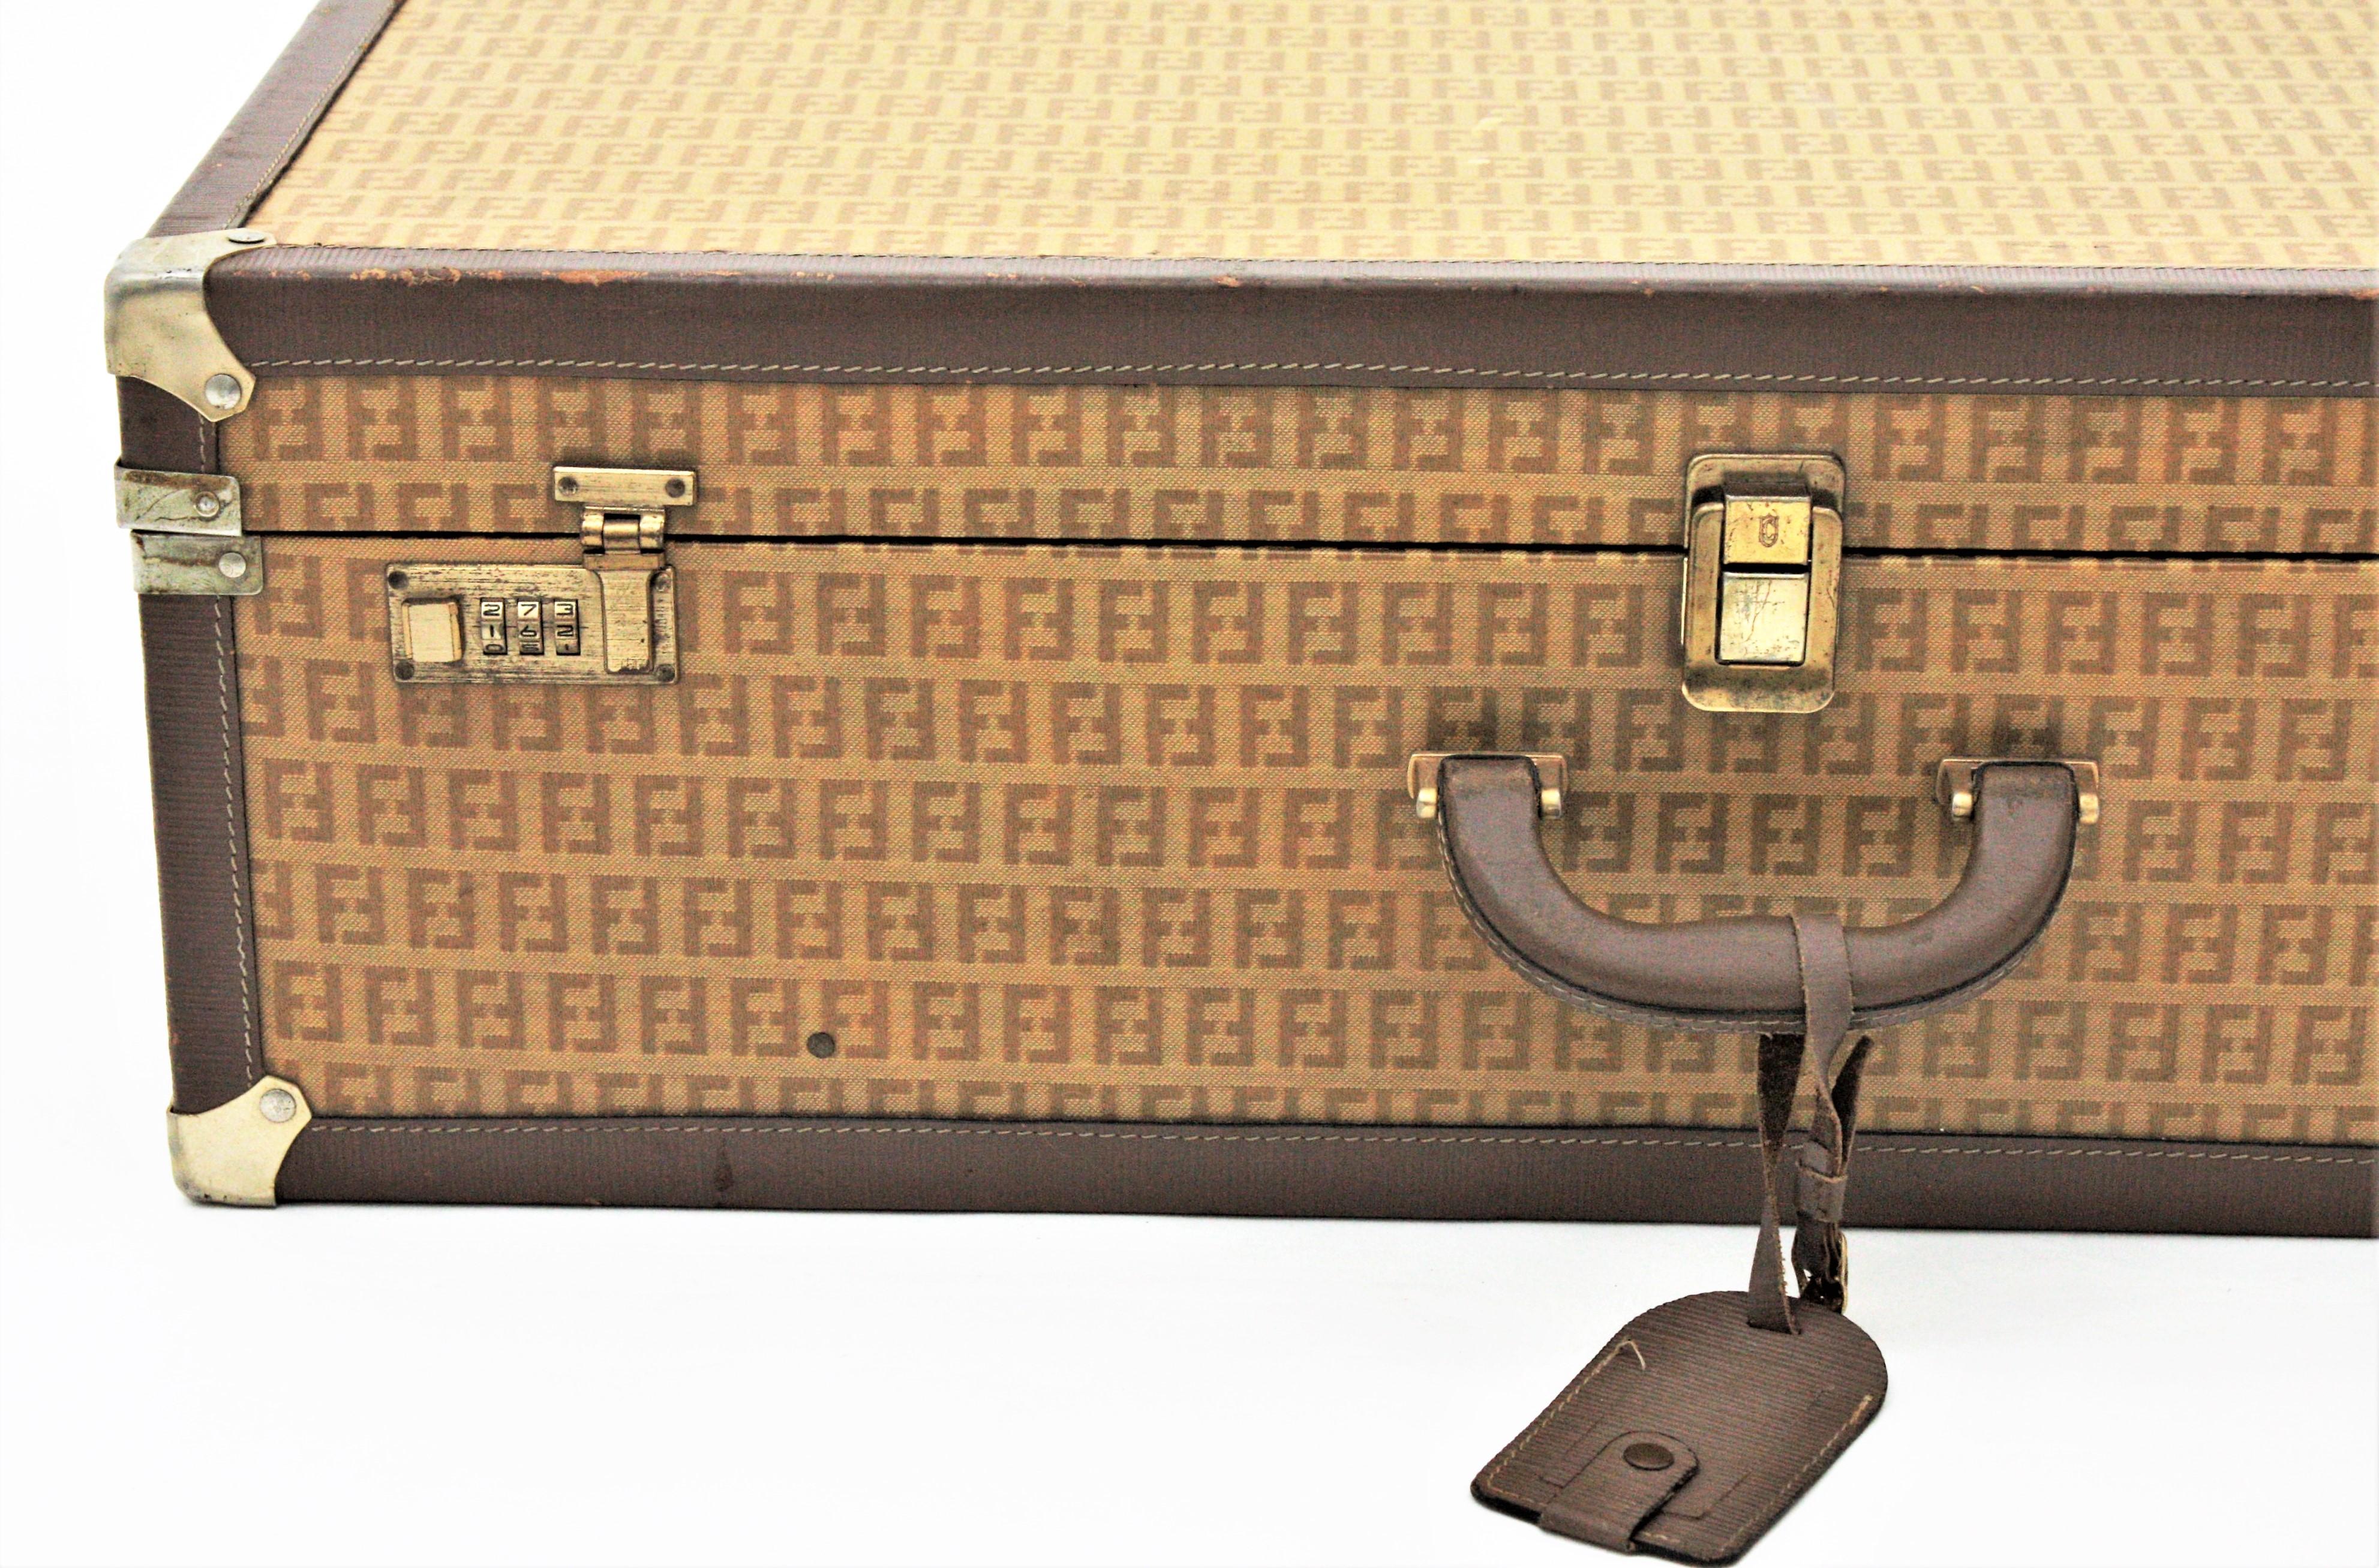 Fendi Zucca Pattern Epi Leather Vintage Luxury Hard Trunk Suitcase, 1970s
Large Fendi Zucca monogrammed large hard suitcase. The Zucca pattern design luggage was made by Italian fashion designer Fendi. Italy 1970s
This hard-sided piece can also be